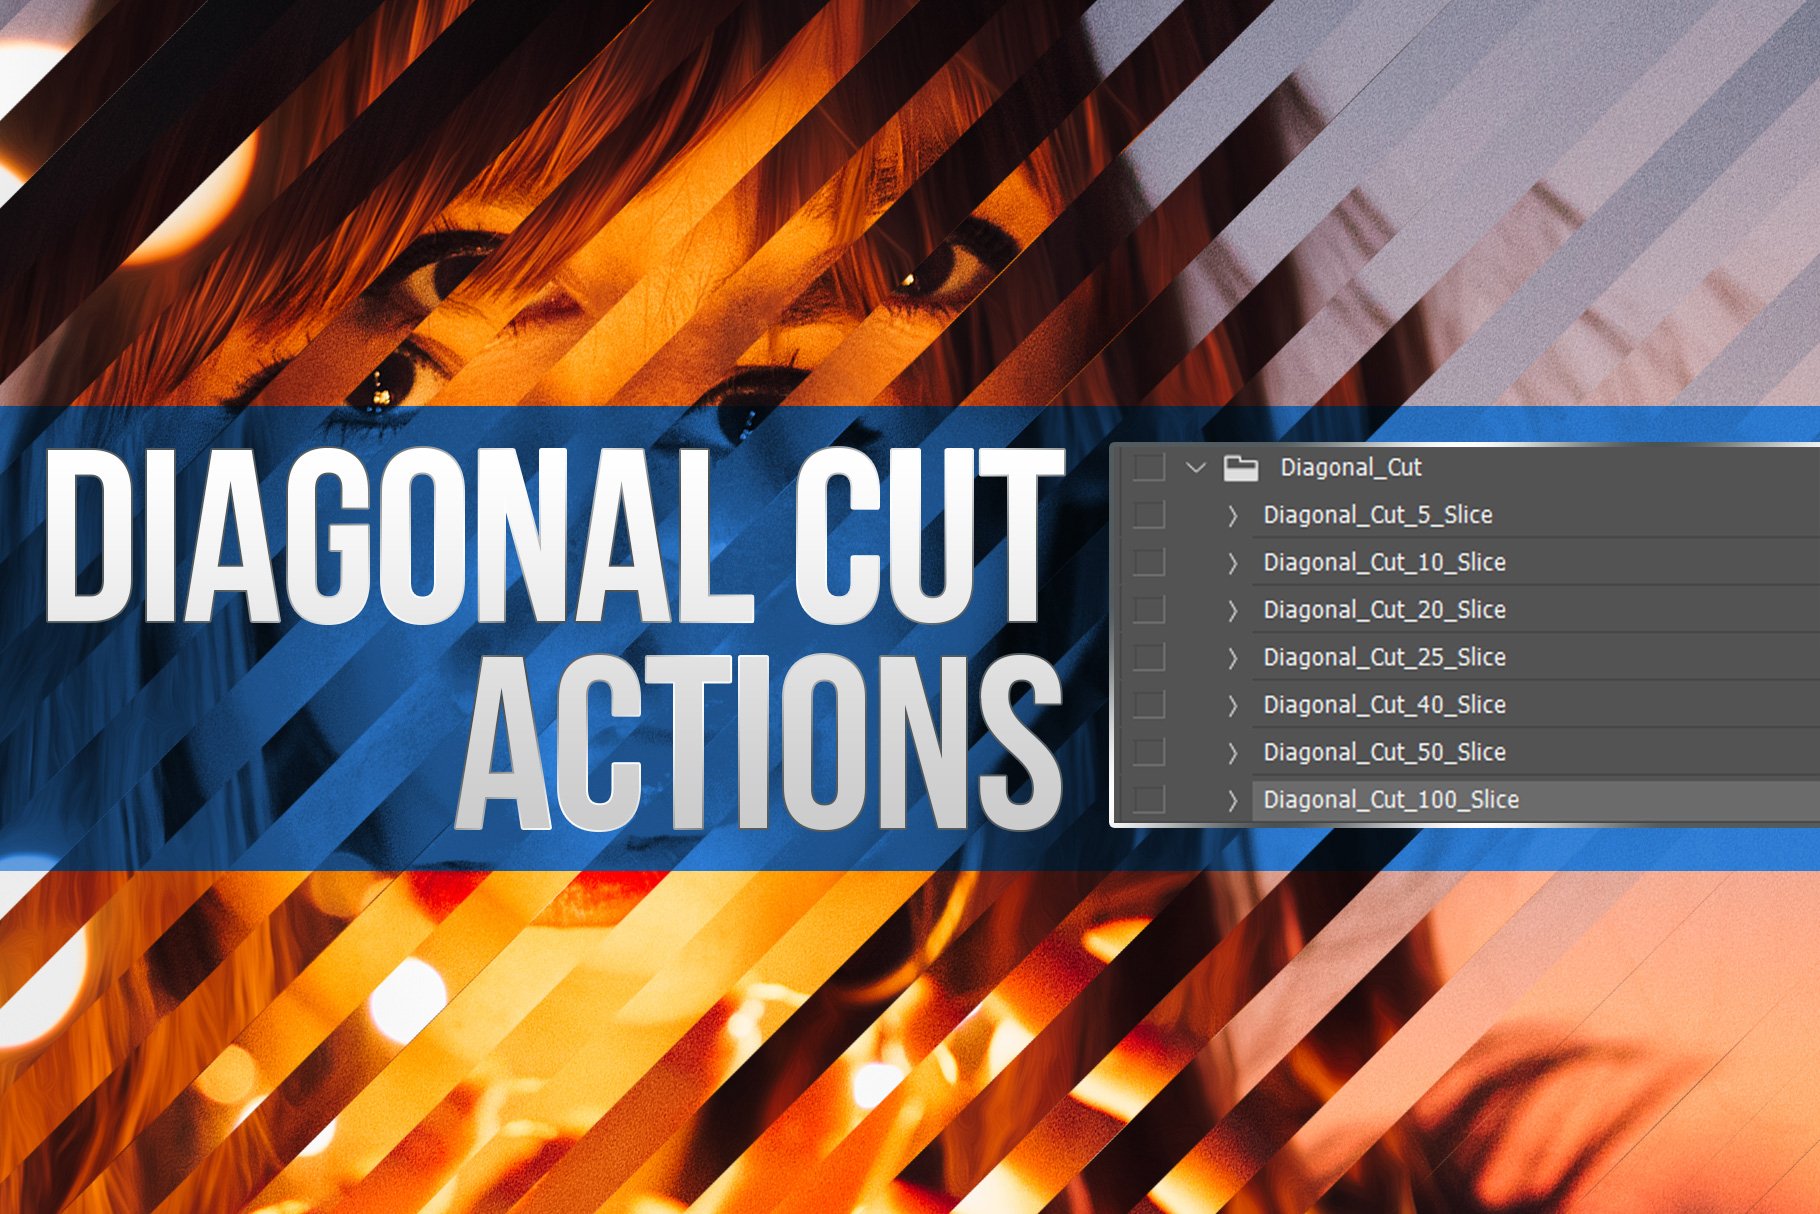 Diagonal Cut Actions for Photoshopcover image.